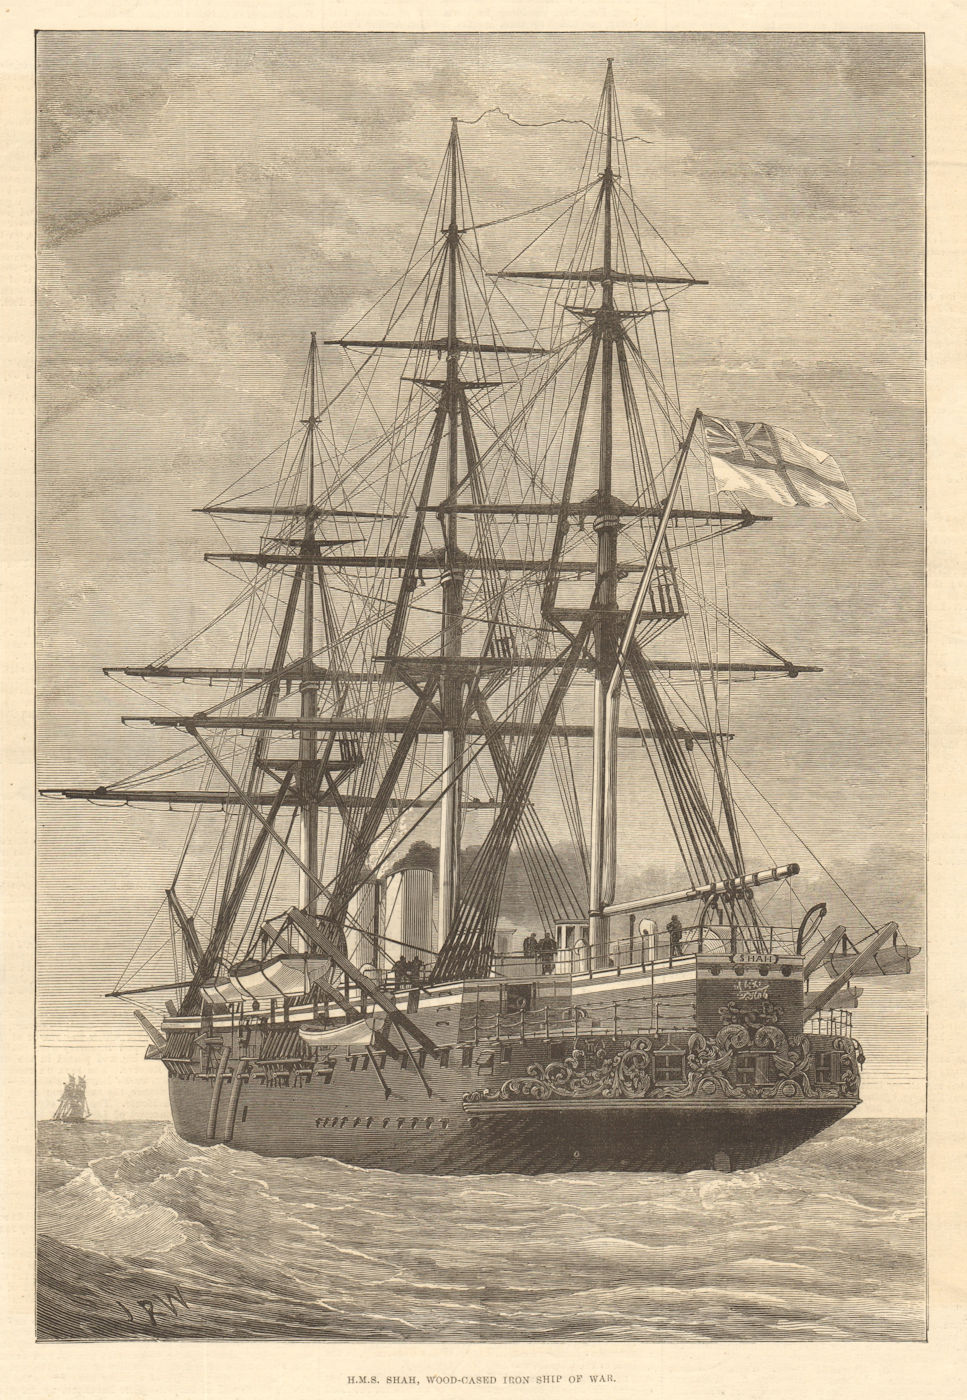 Associate Product H. M. S. Shah, wood-cased iron ship of war. Royal Navy 1876 antique ILN page